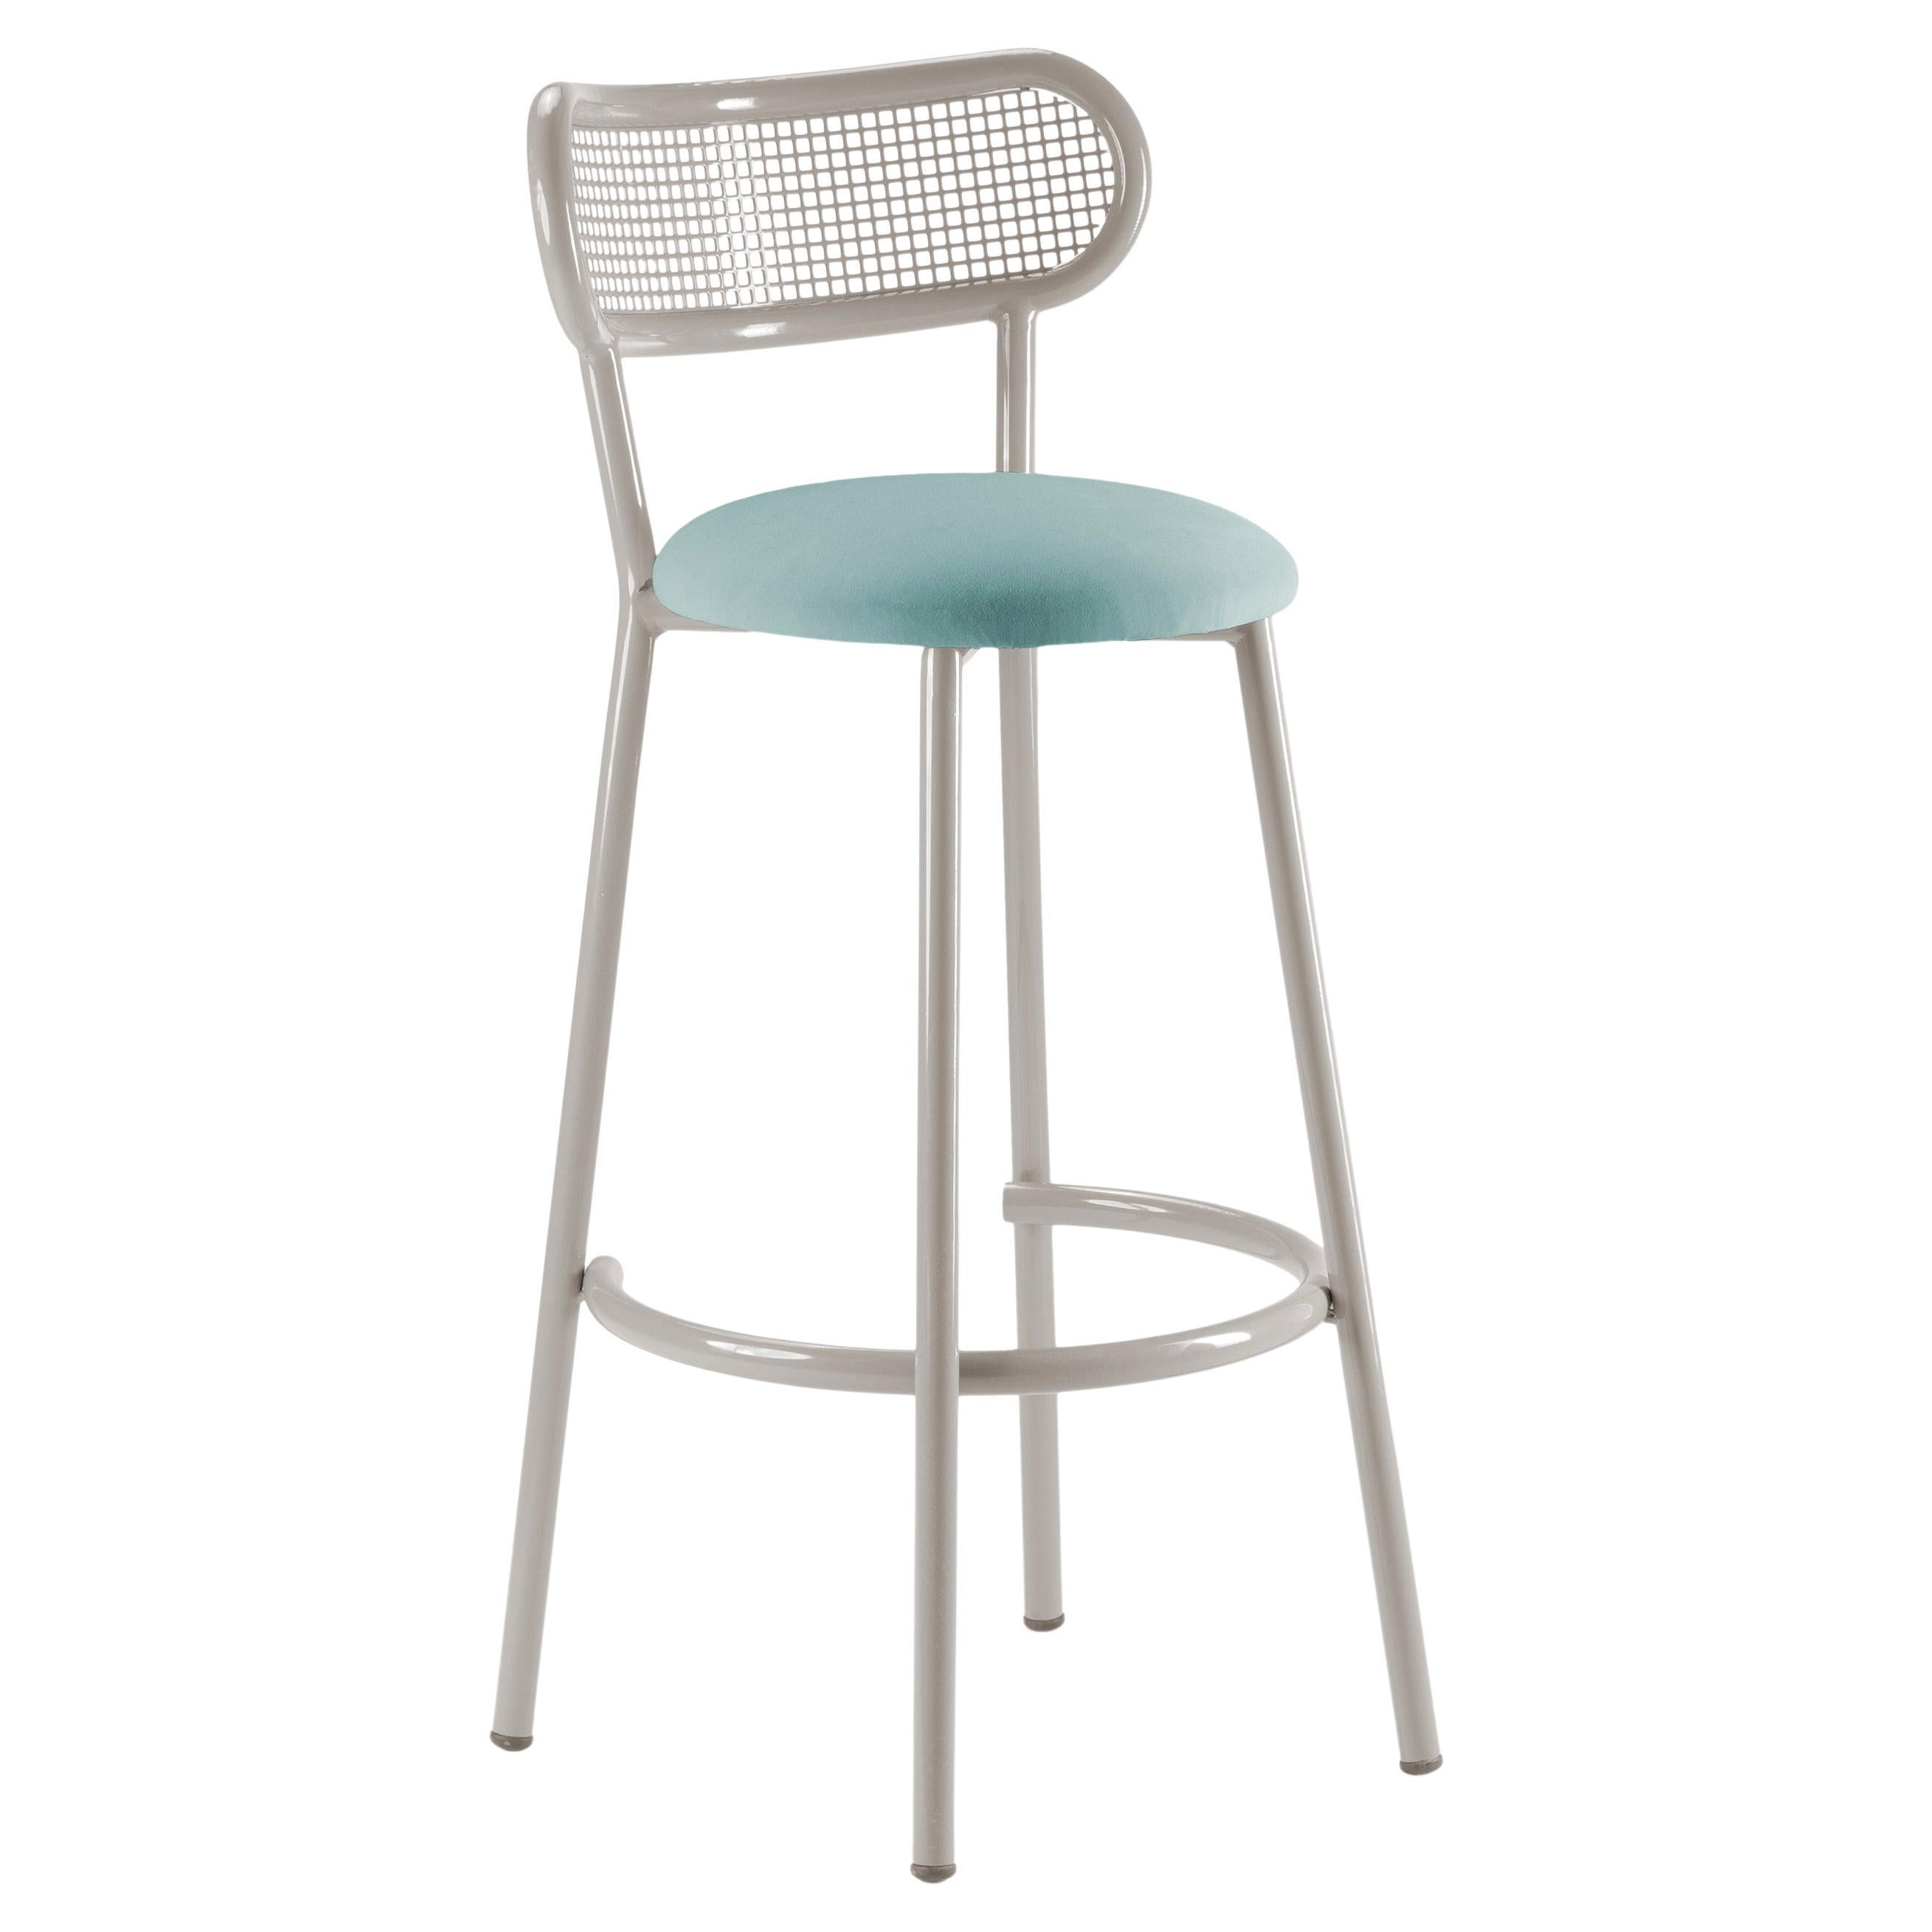 Louise Bar Chair with Taupe Structure, Perforated Steel Back and Upholstery For Sale